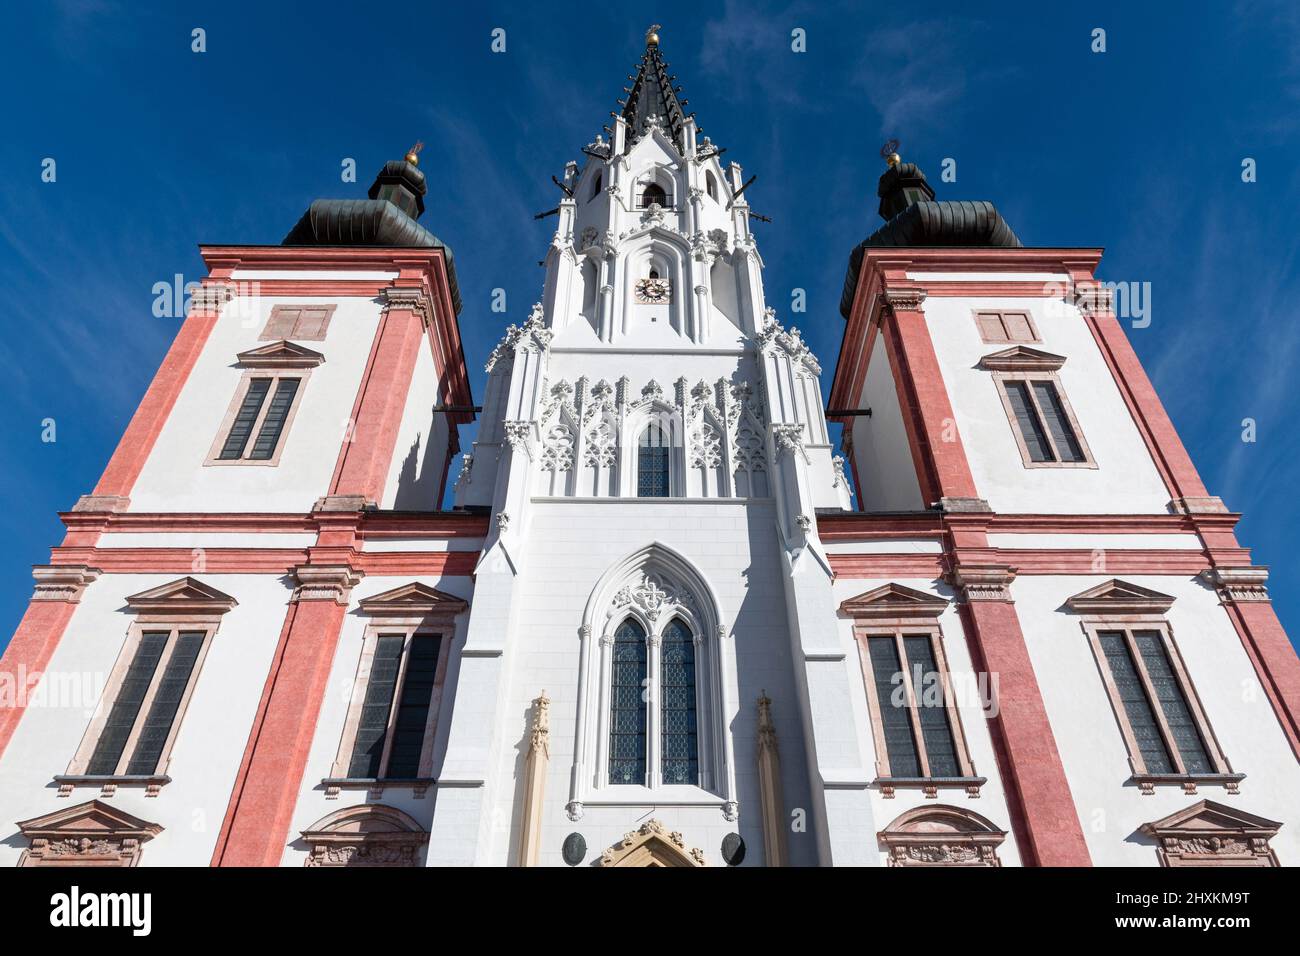 Basilica of the Birth of the Virgin Mary in Mariazell, Austria Stock Photo